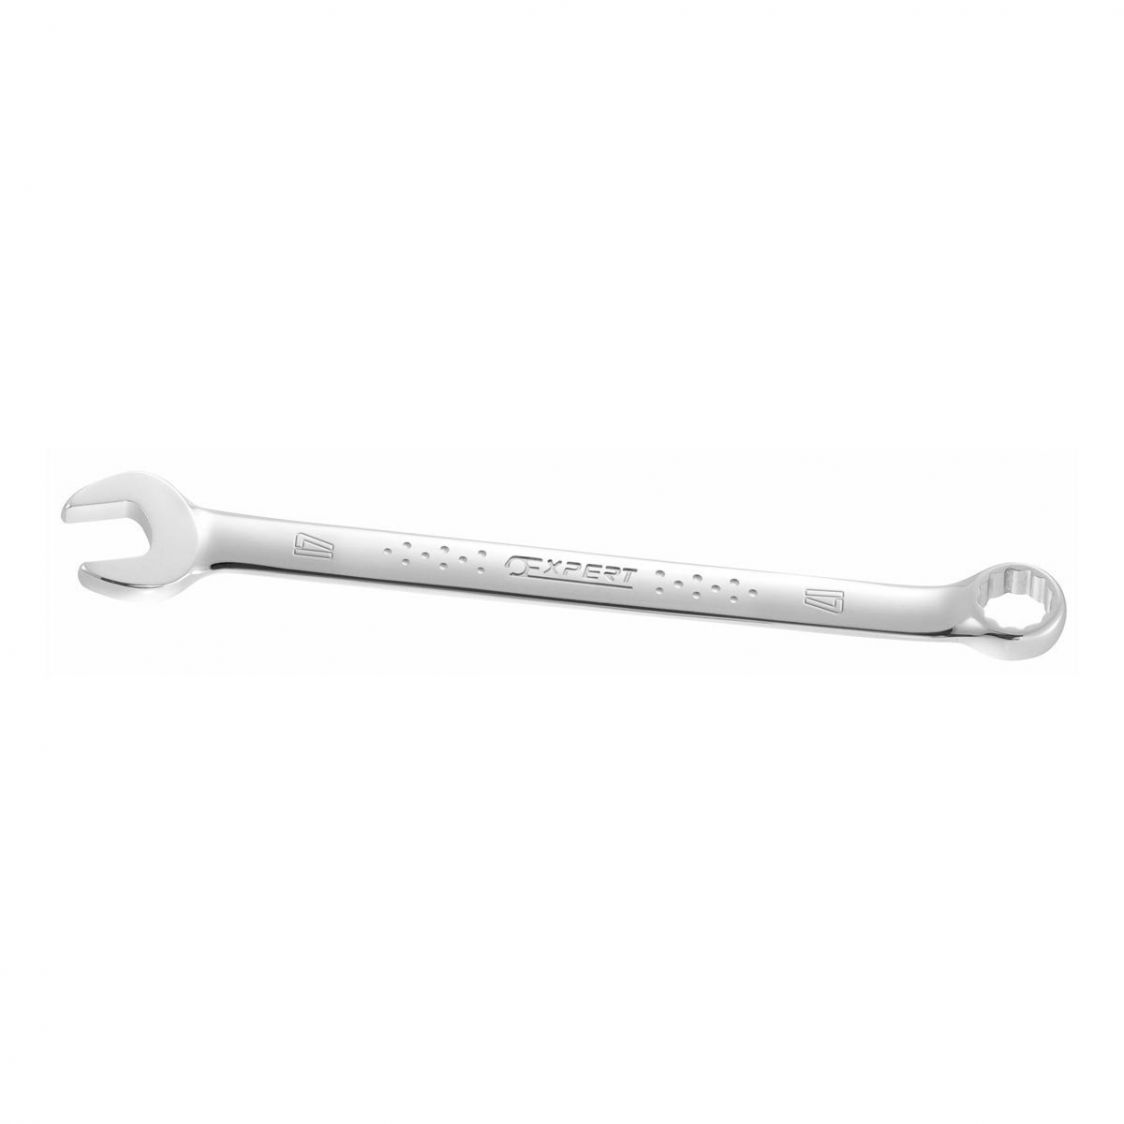 EXPERT by FACOM E117717 - 42mm Metric Long Combination Spanner